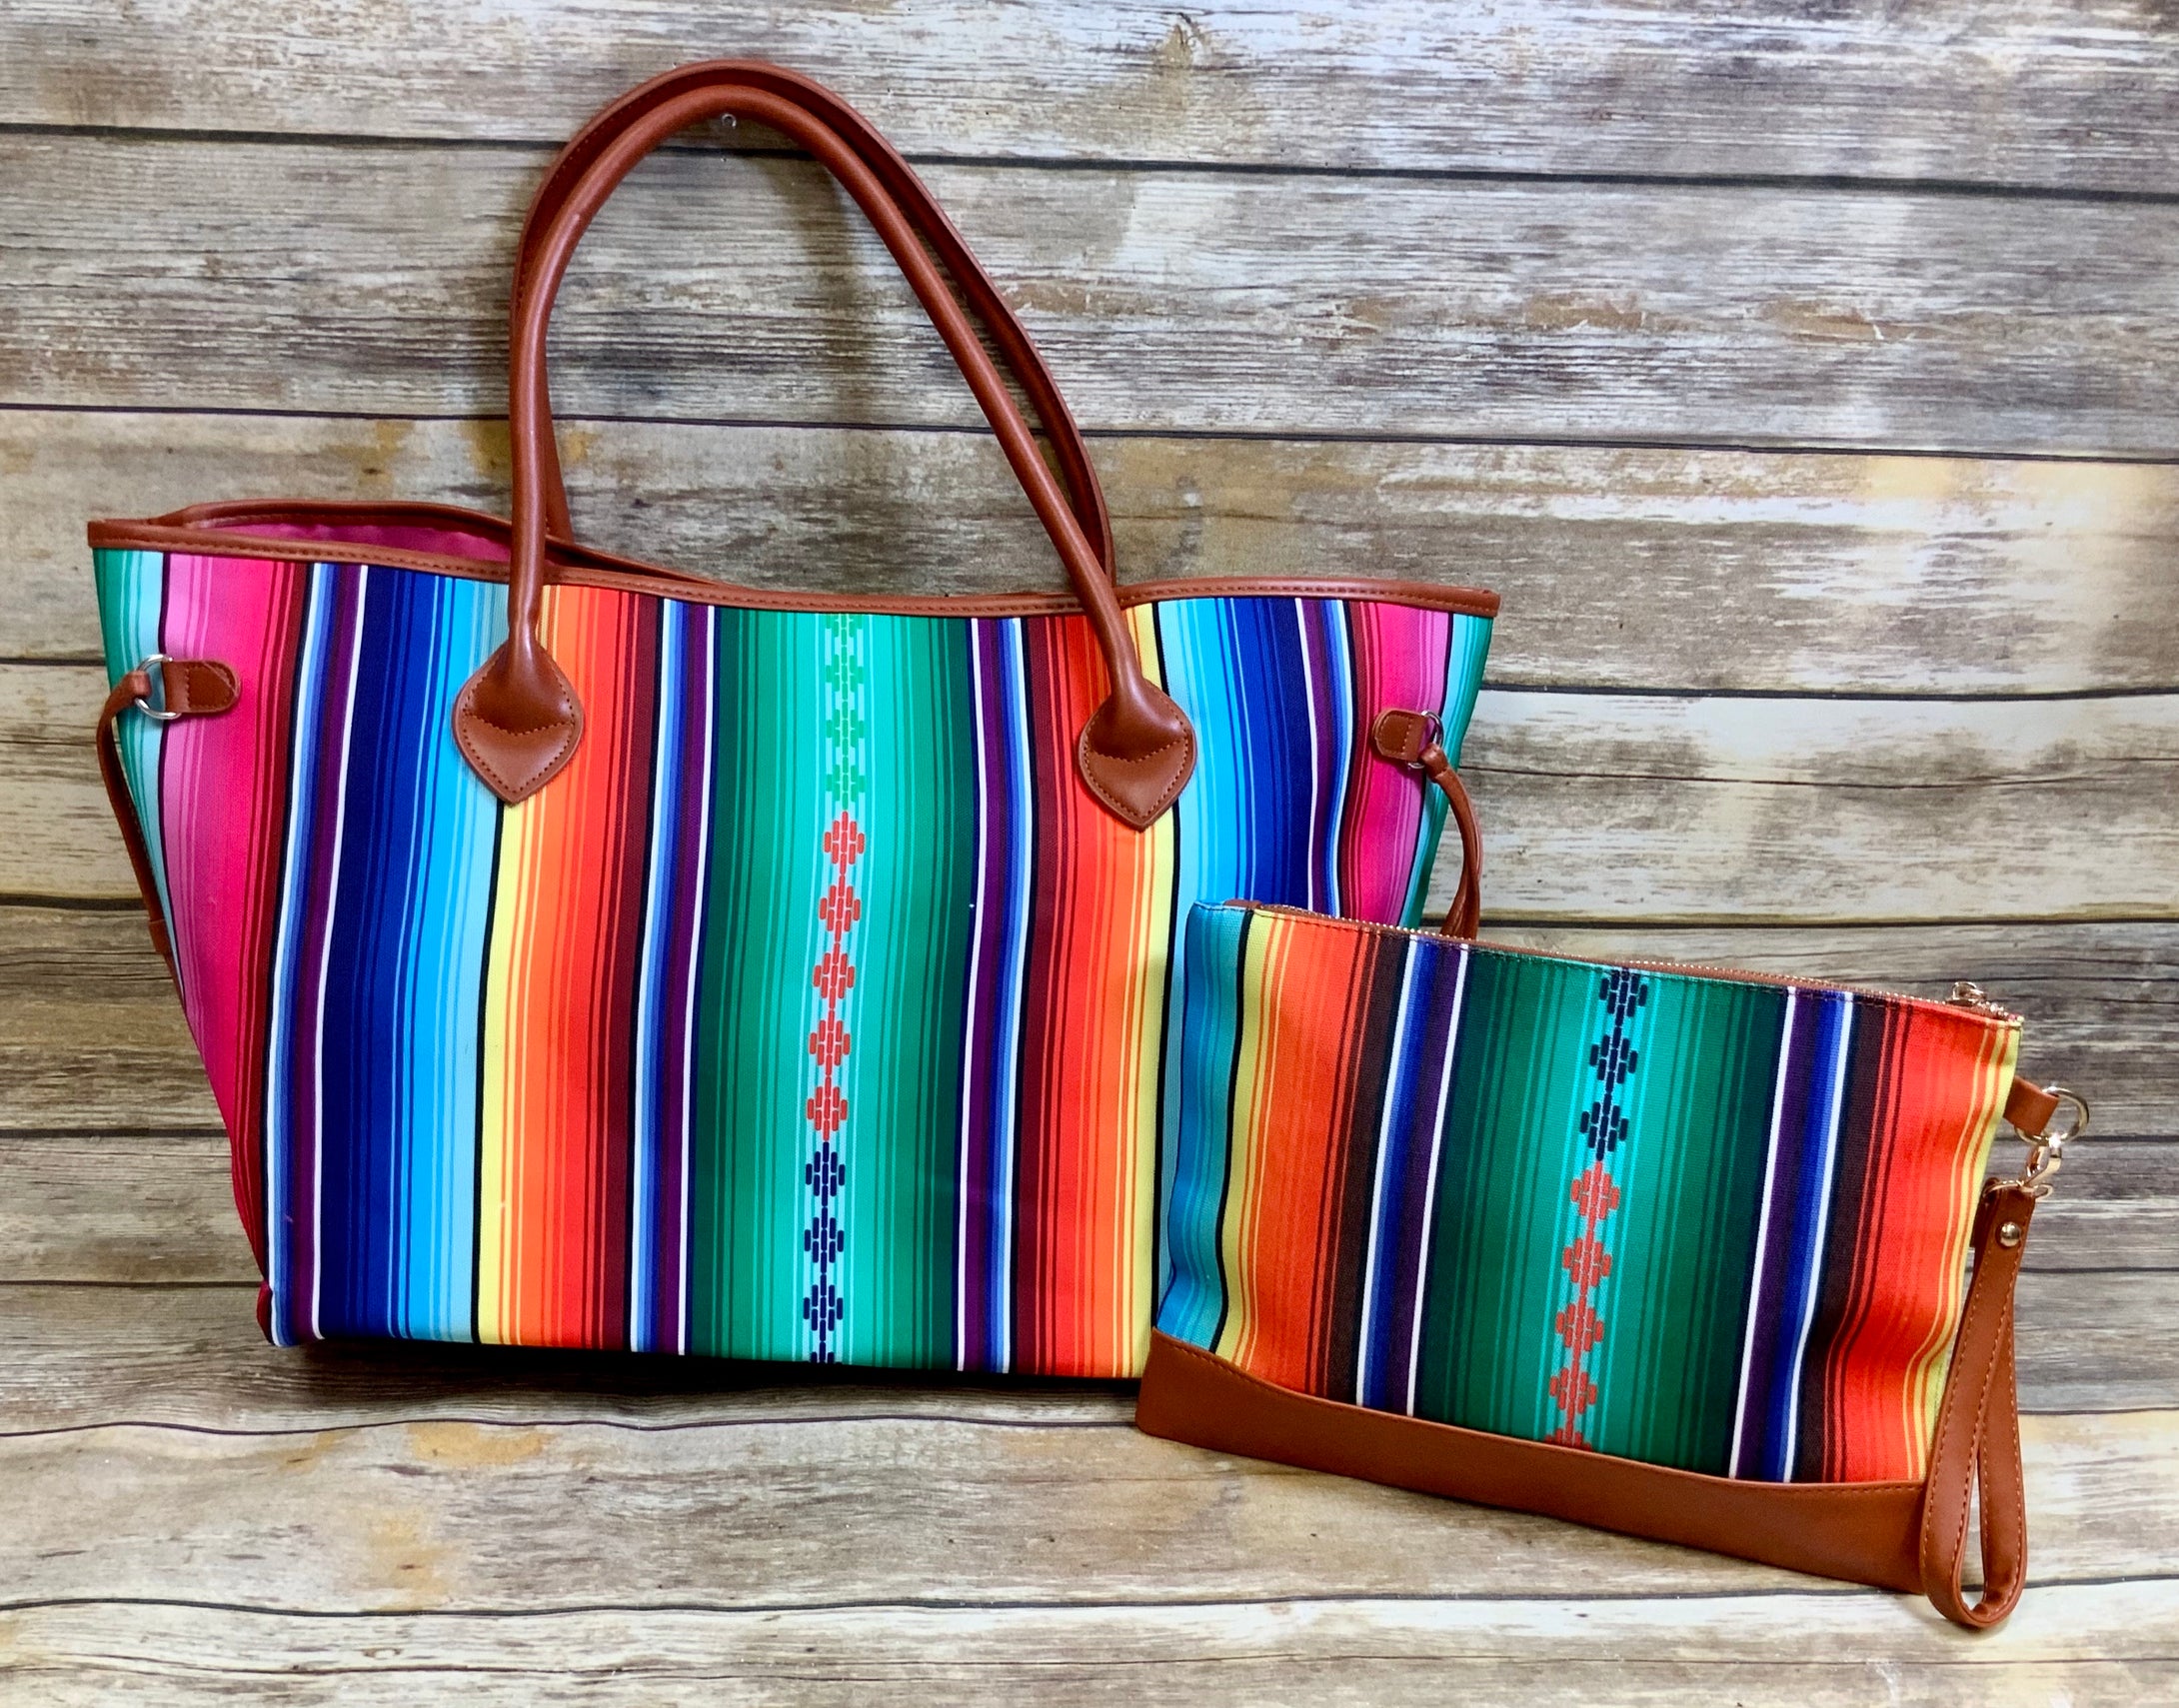 Southwest Horizon High Quality Canvas Collection(tote and wristlet) Sold Separately